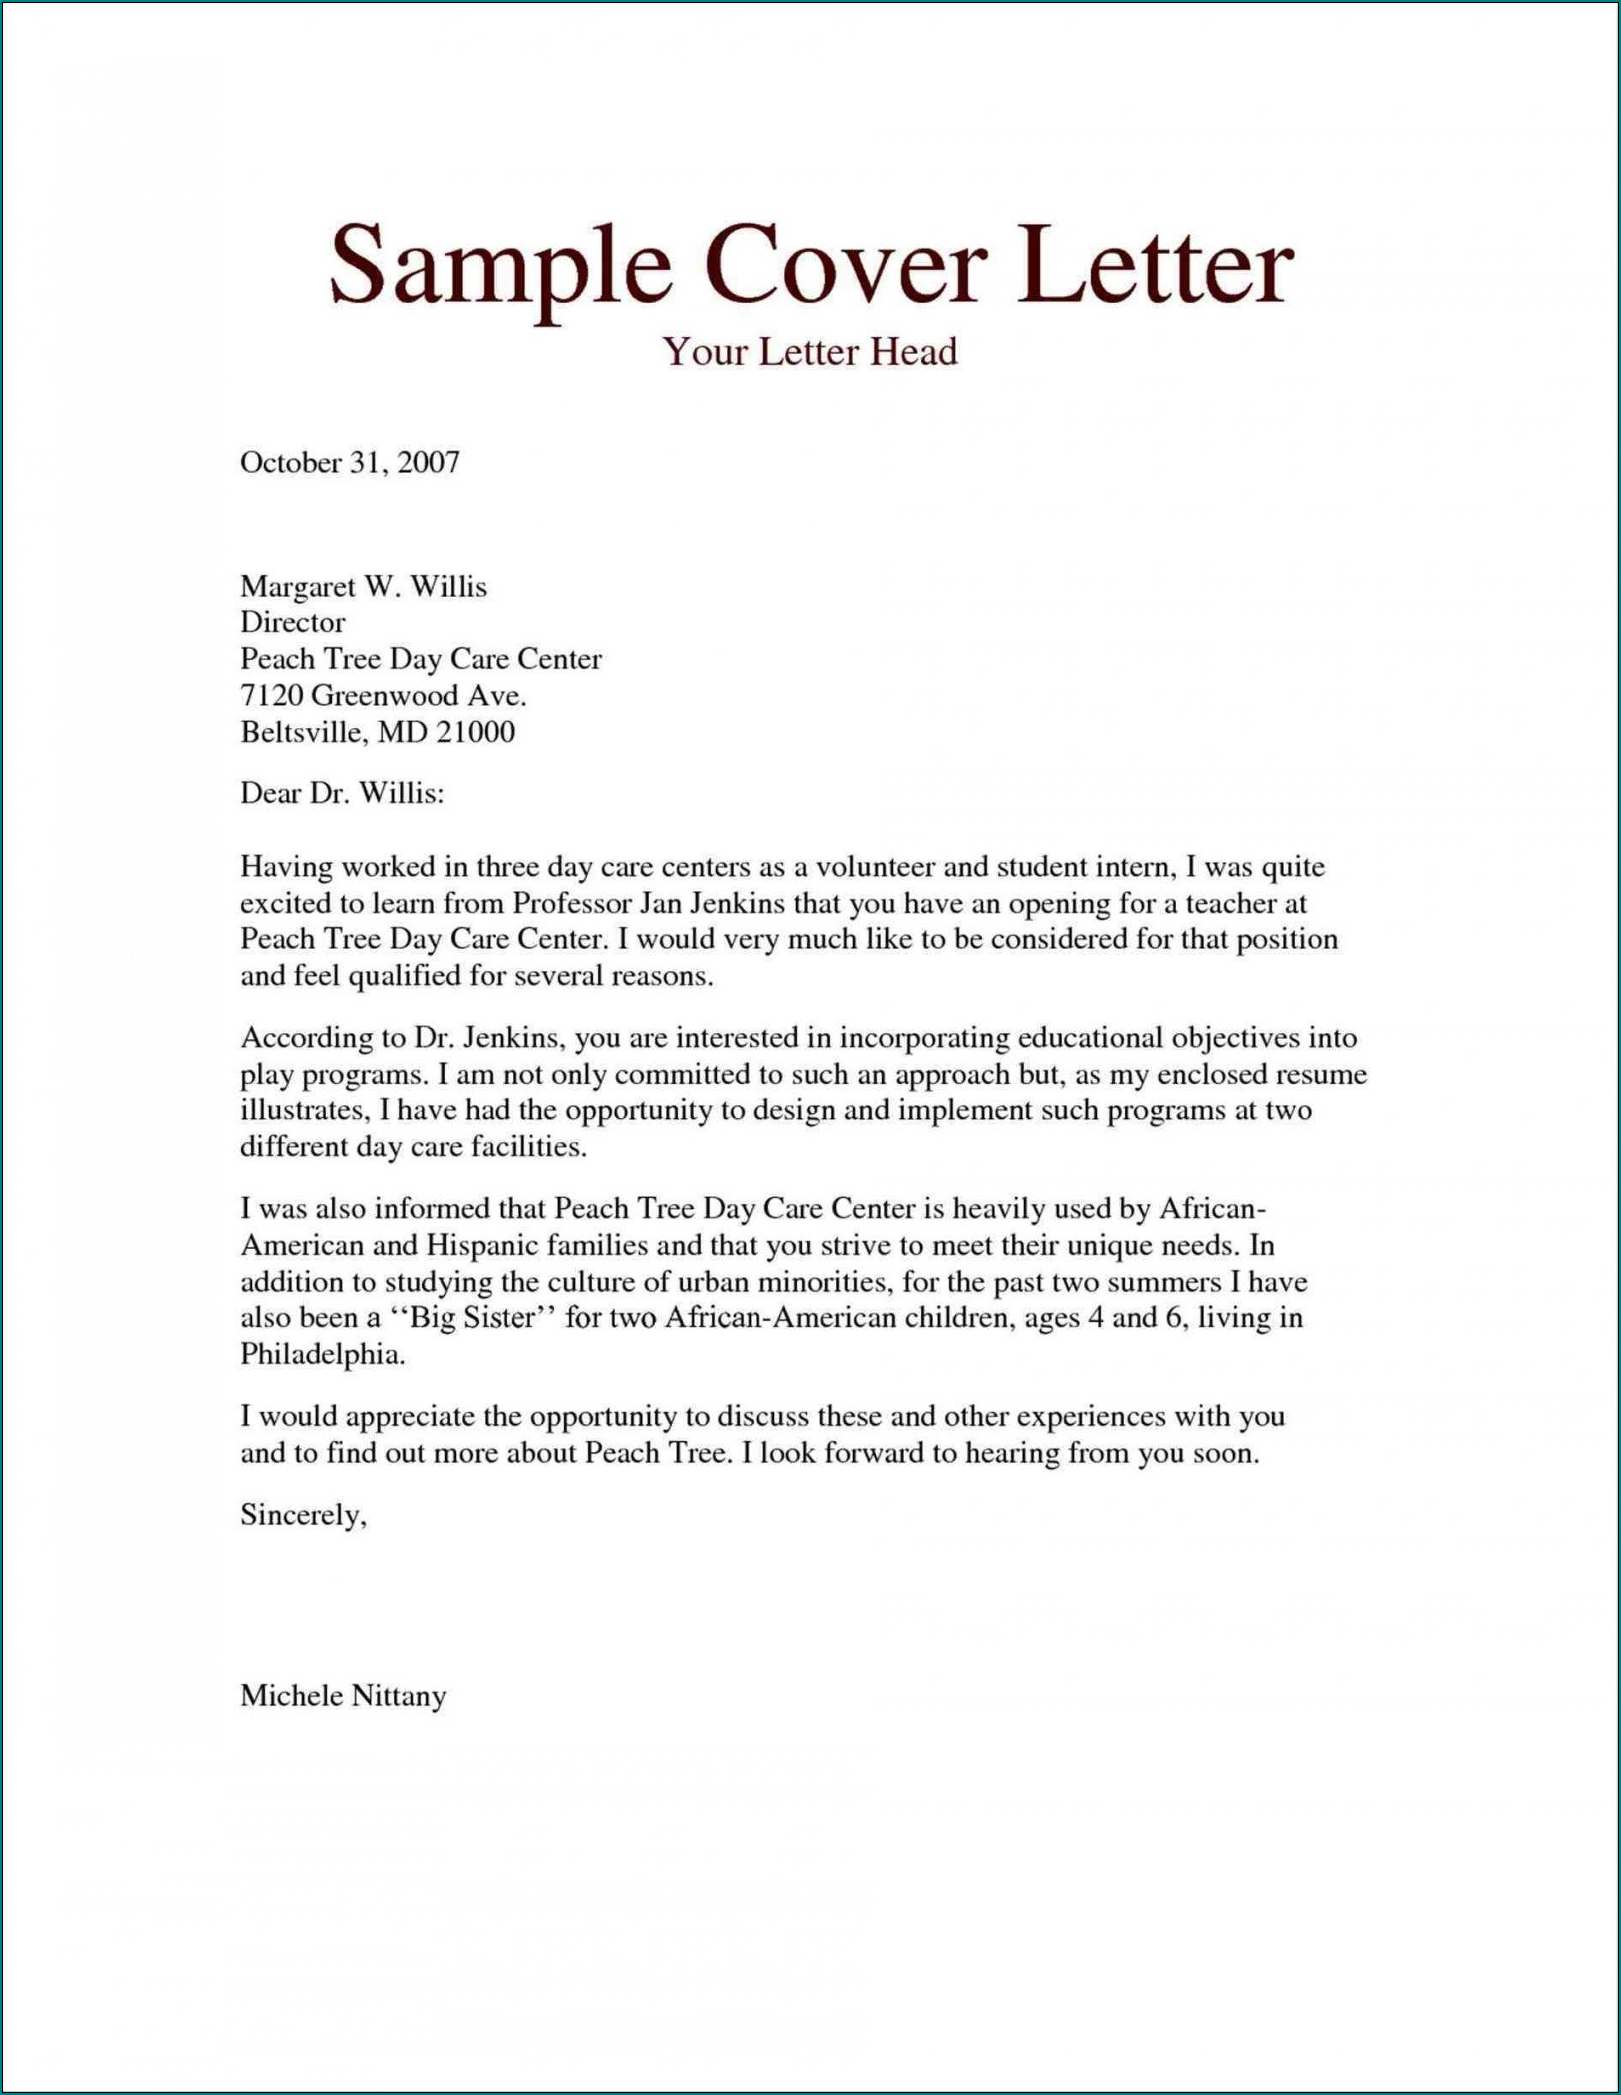 Example of Professional Cover Letter Template